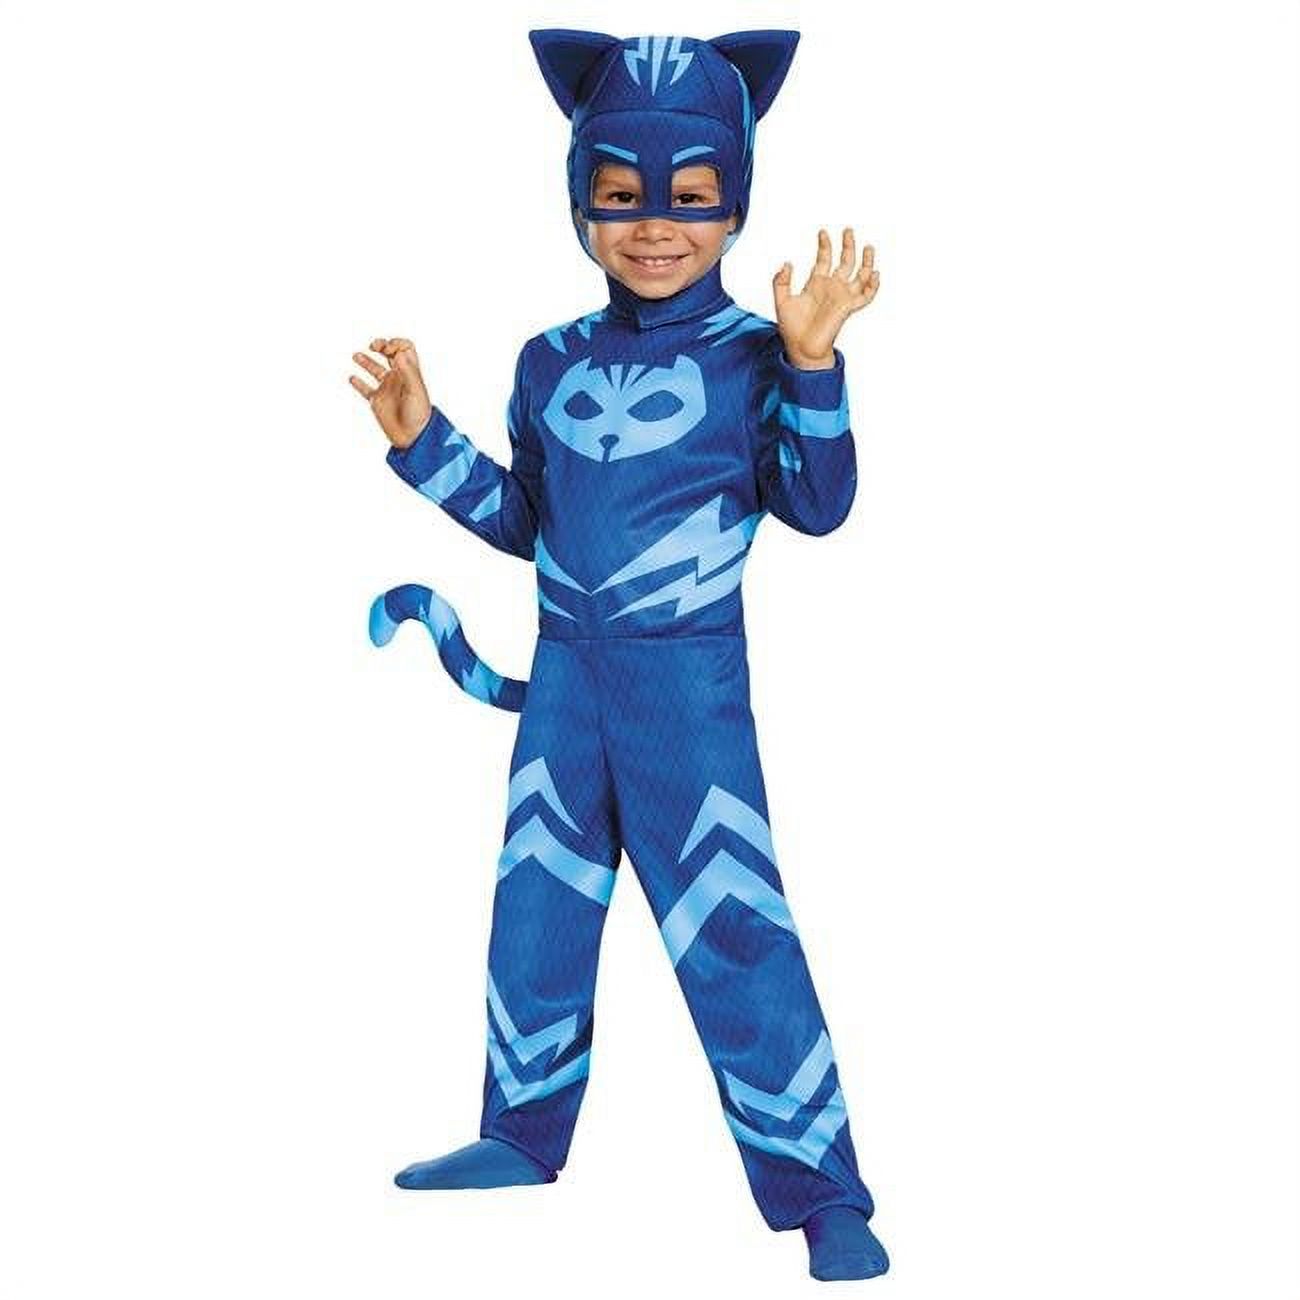 Morris Costumesss Catboy Classic Boy's Halloween Fancy-Dress Costume for Toddler, 3T-4T - image 1 of 1